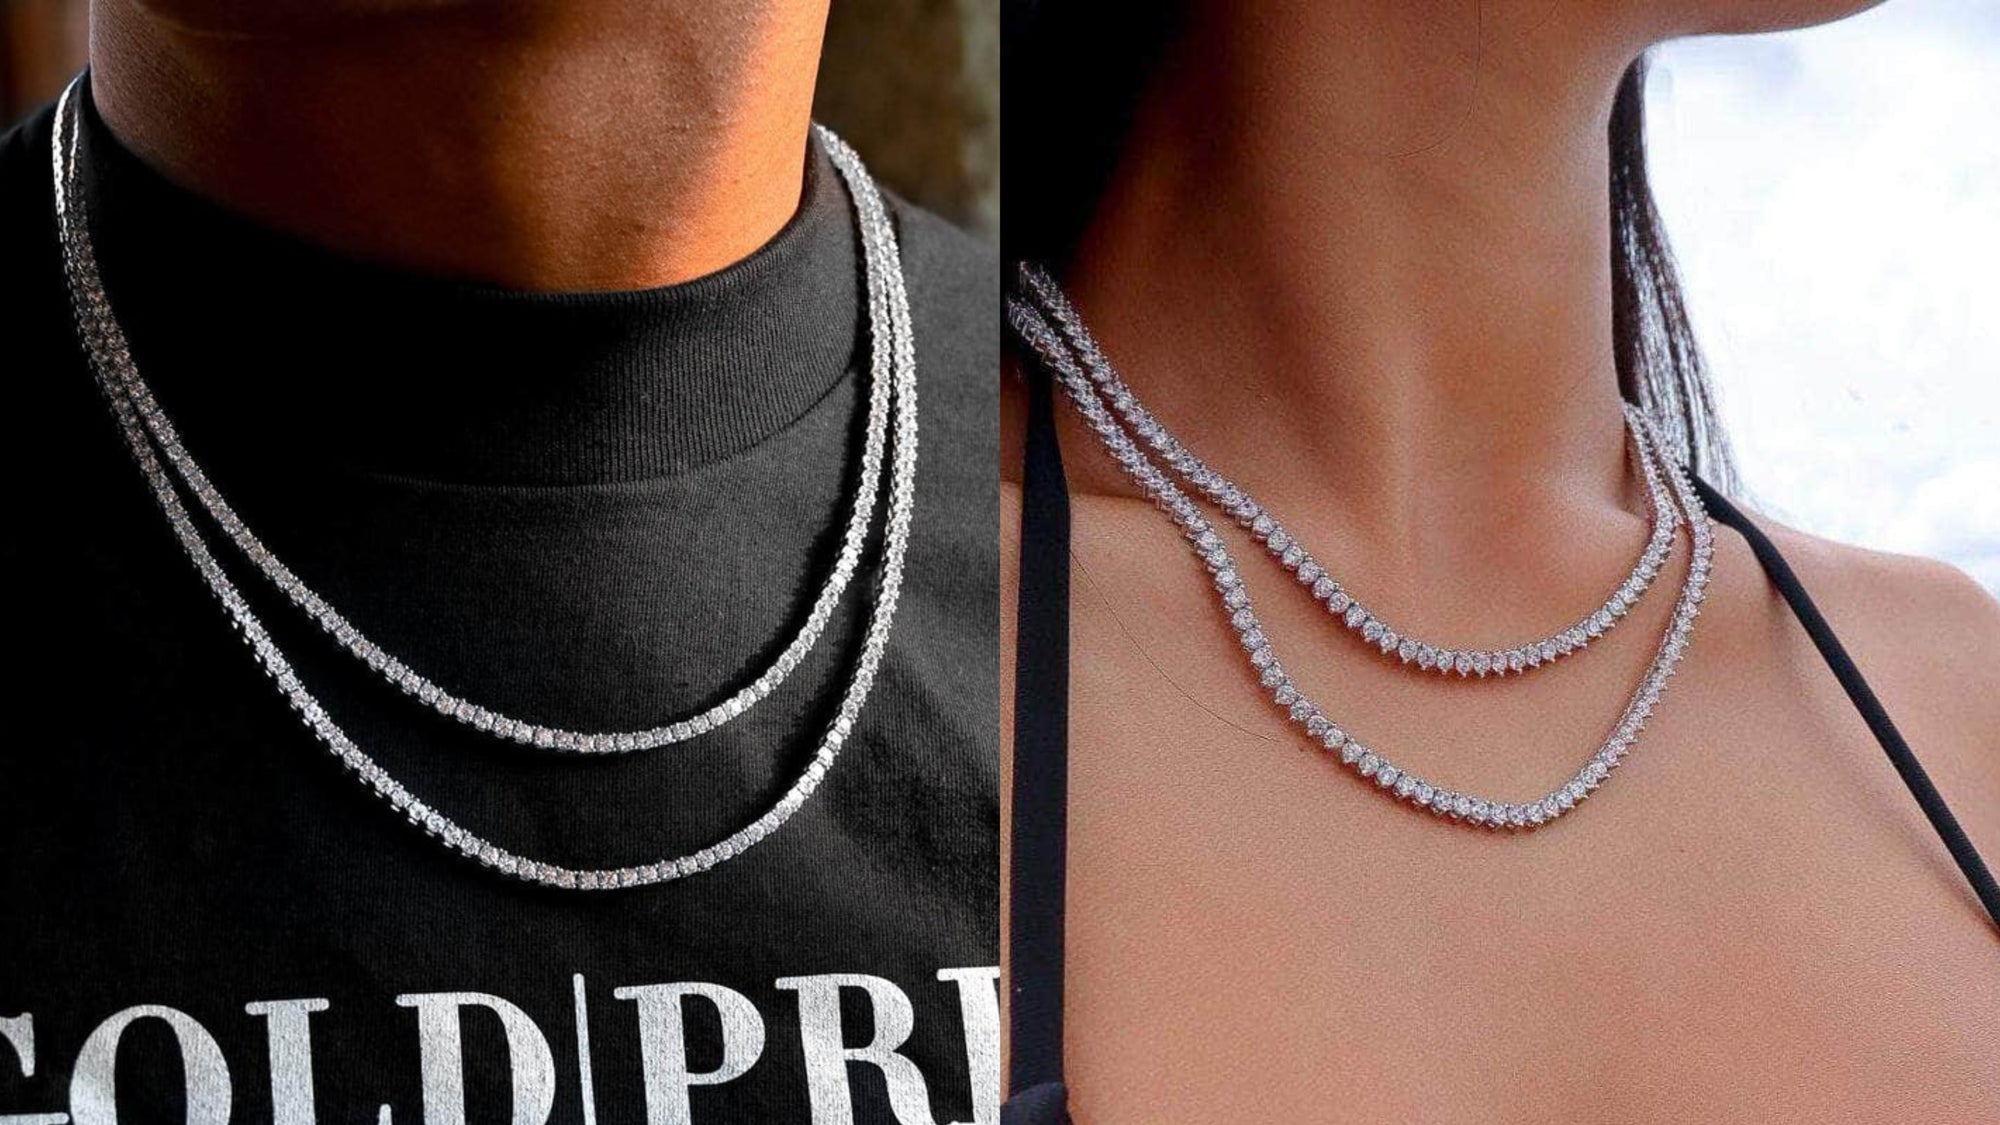 Why Tennis Necklaces Are Some of the Hottest Chains?